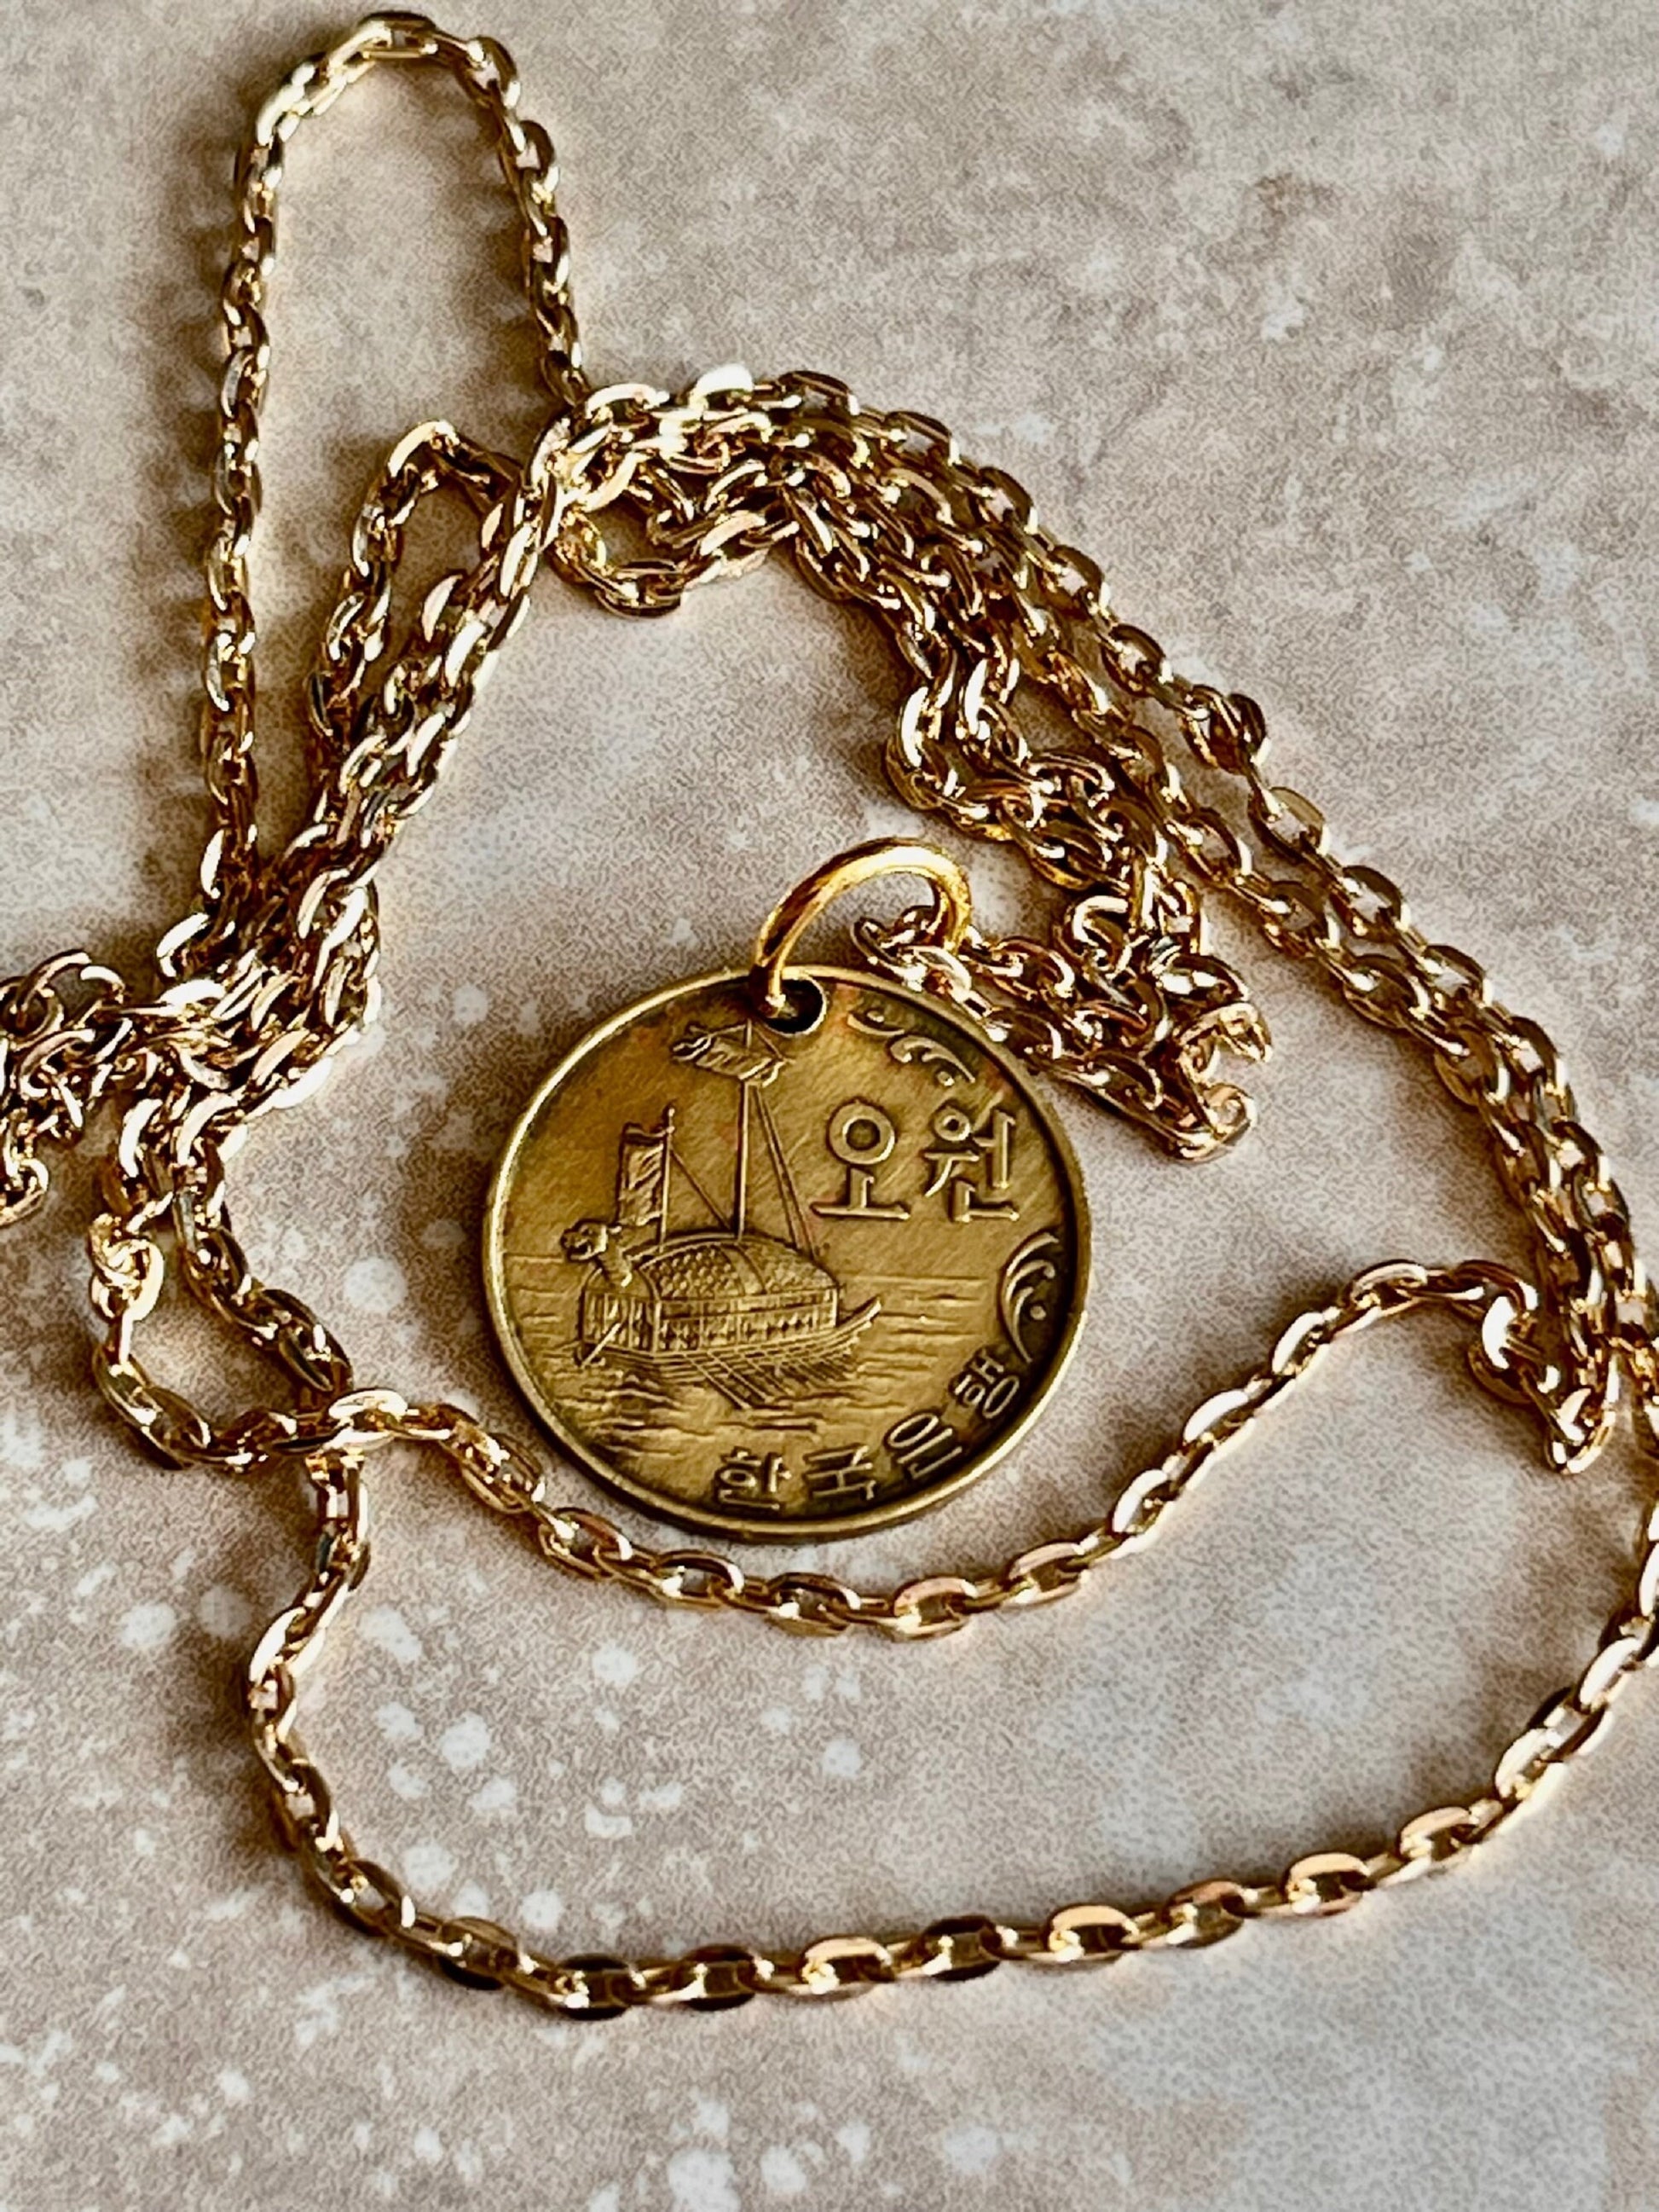 South Korea Coin Necklace Korean 5 Won Personal Pendant Old Vintage Handmade Jewelry Gift Friend Charm For Him Her World Coin Collector